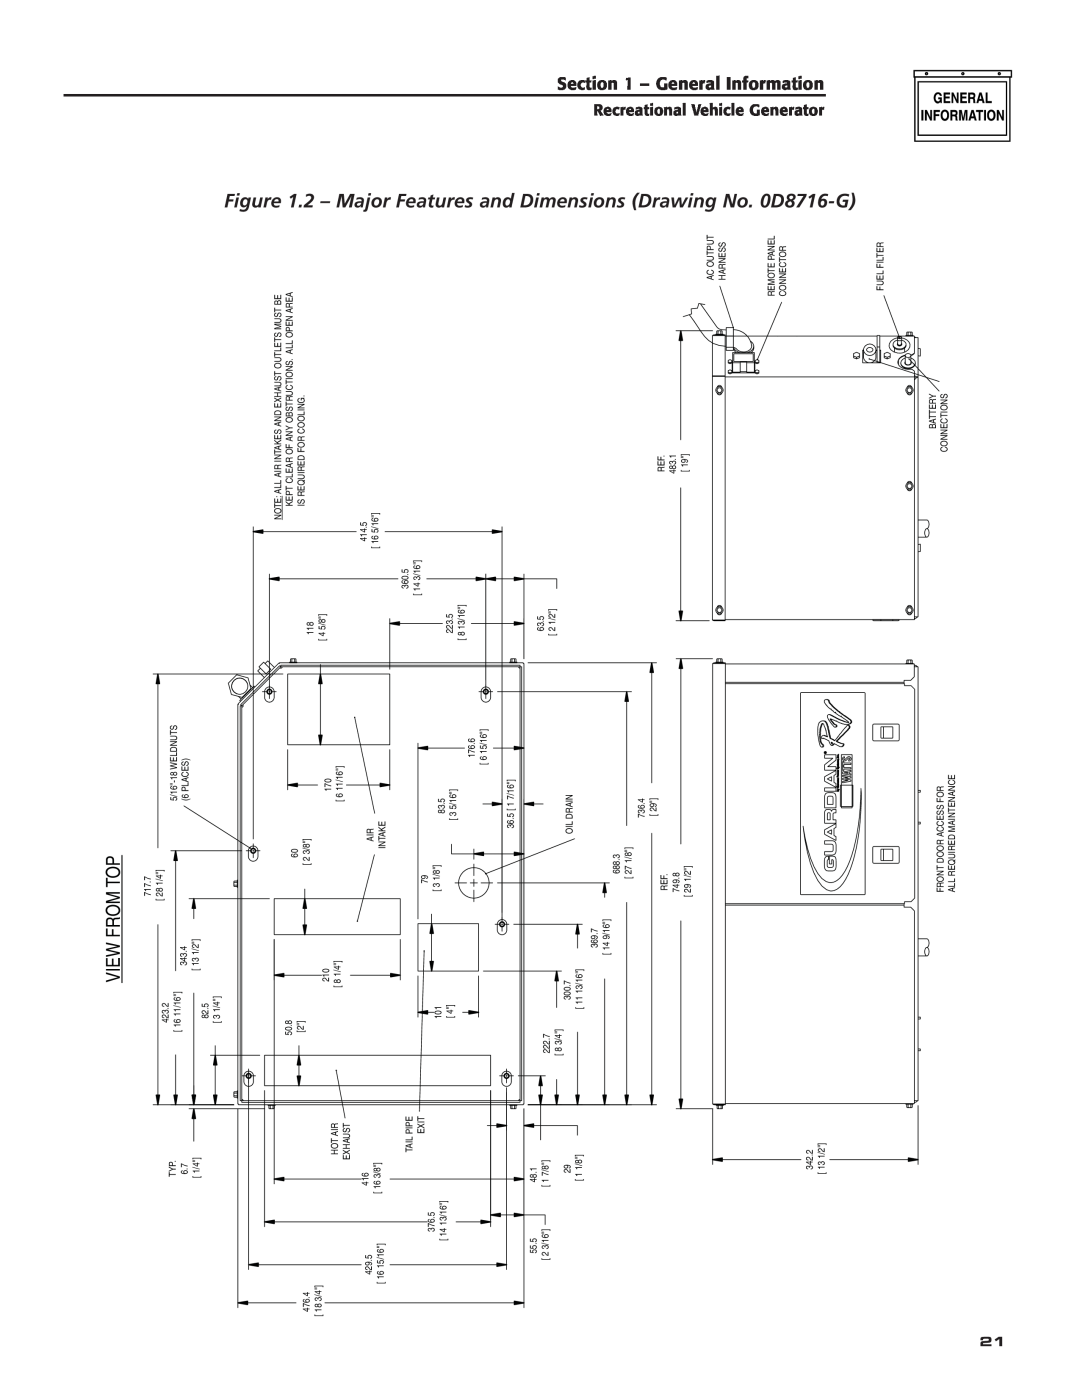 Generac Power Systems 004700-00 owner manual 0D8716, 2 - Major Features and Dimensions Drawing No, View From Top 